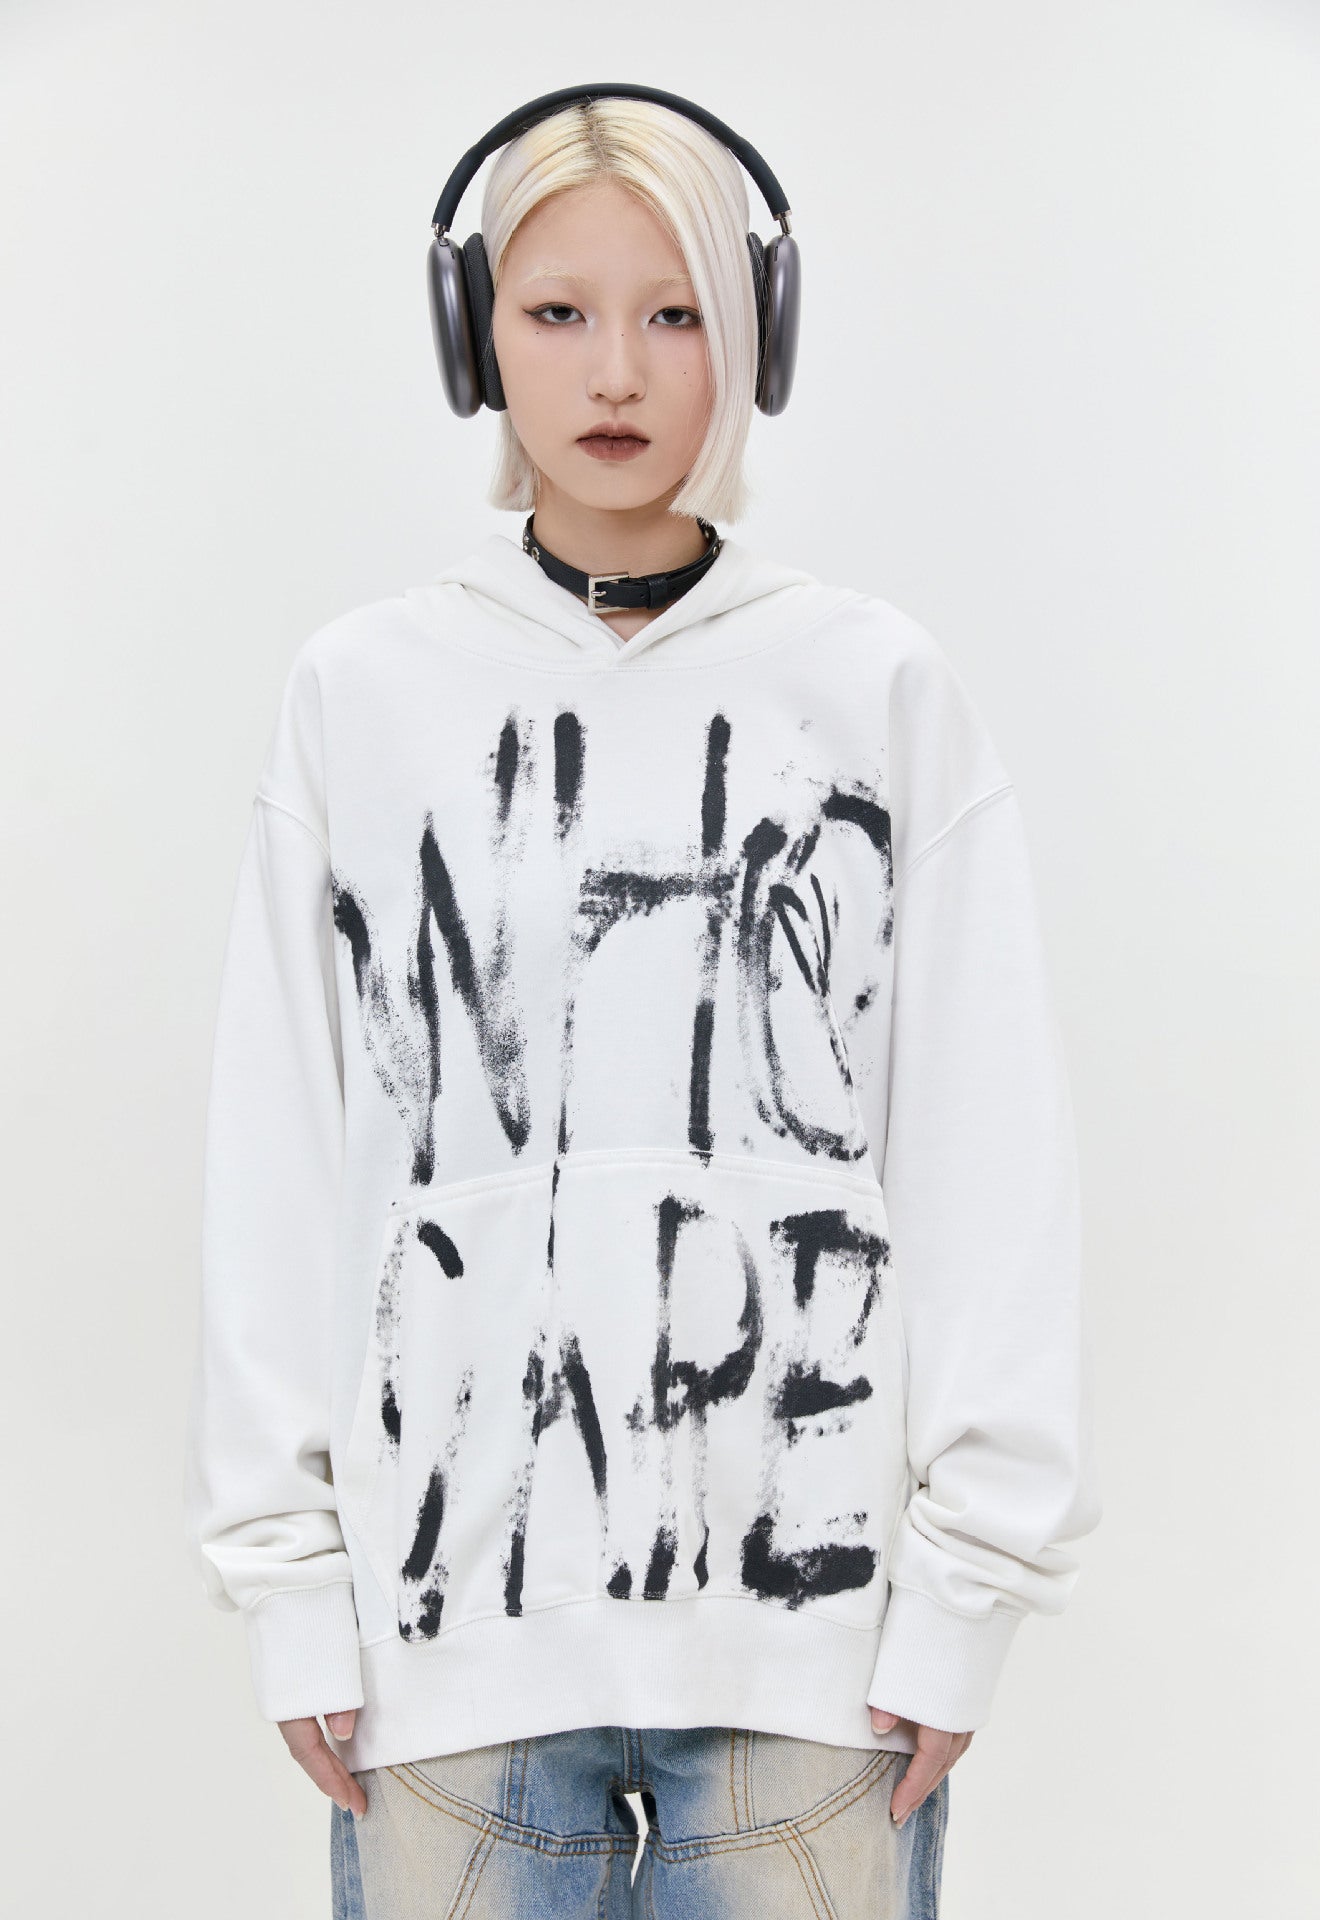 Tie-dyed Graffiti Top Loose All-match Long-sleeved Hooded Sweater